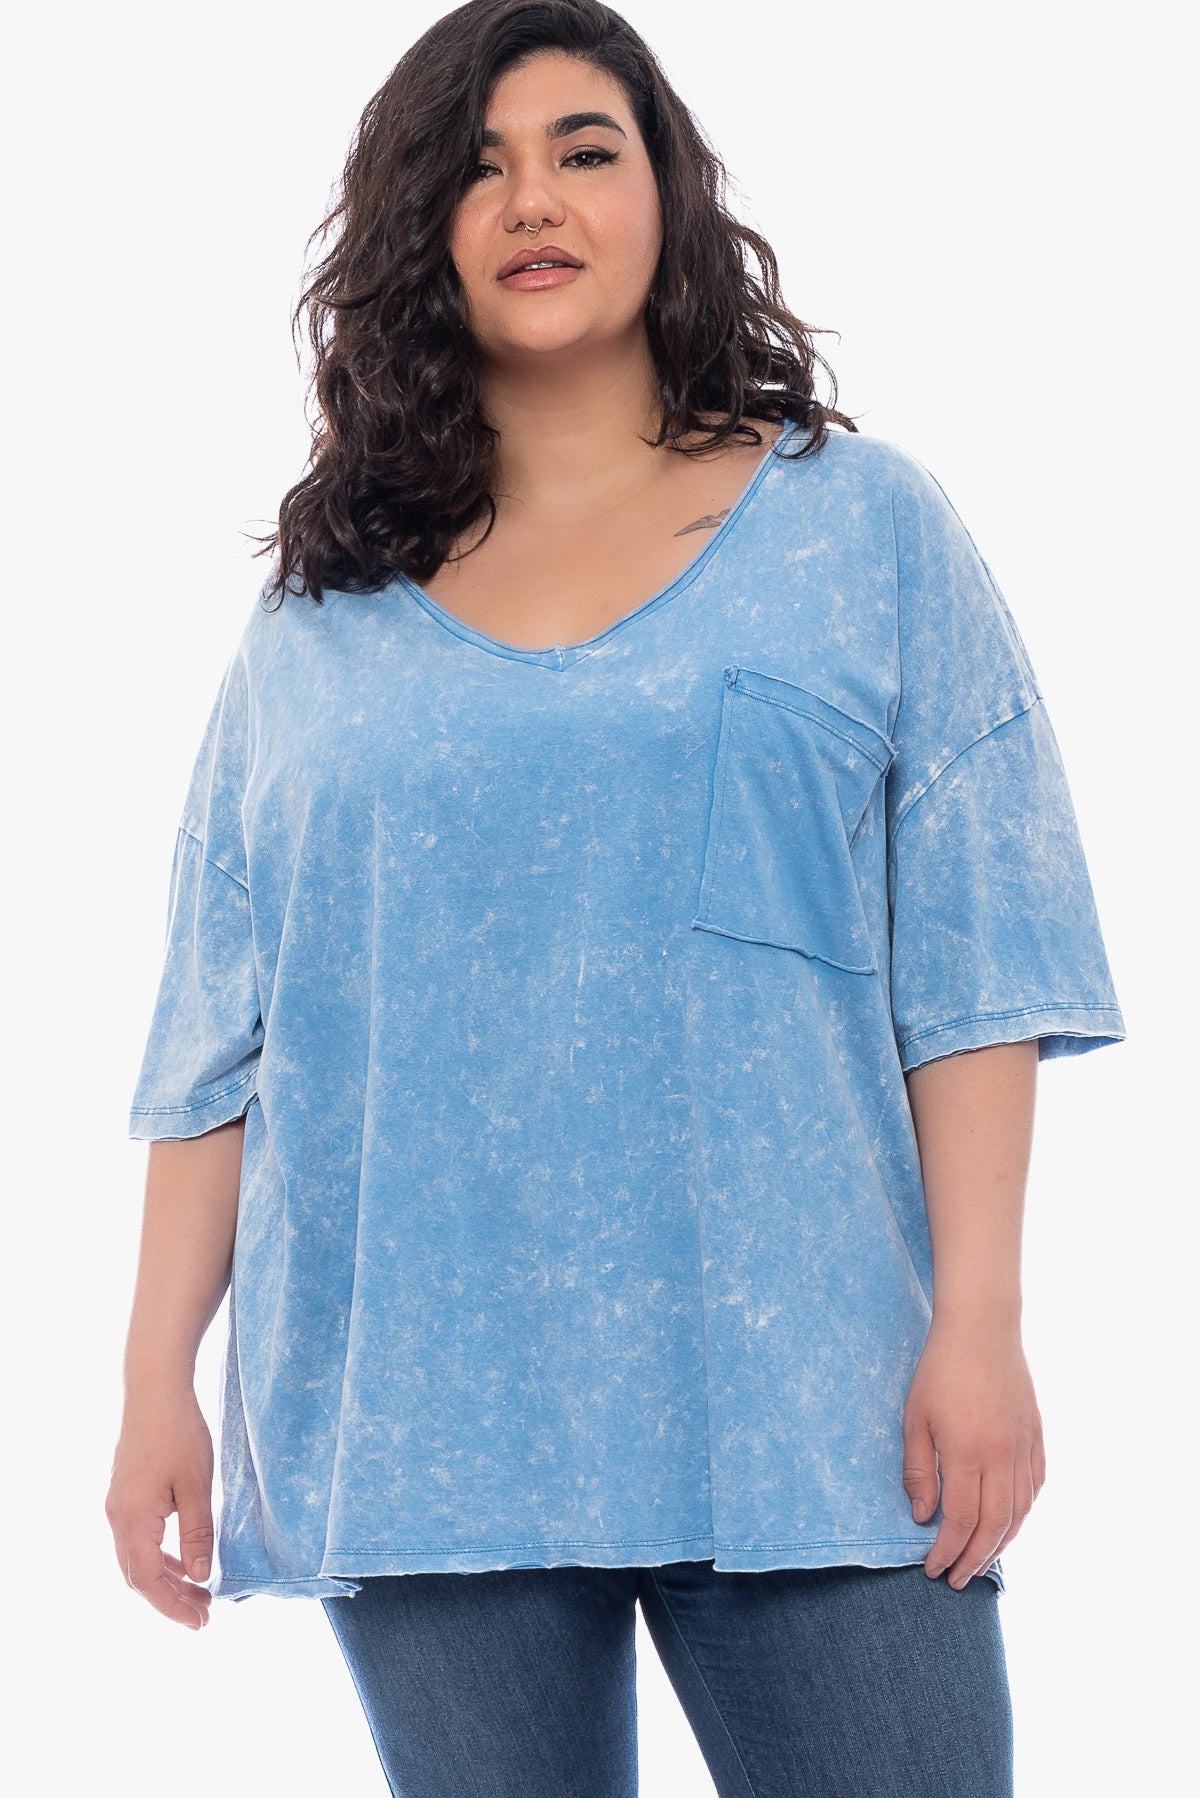 APRIL washed cotton top